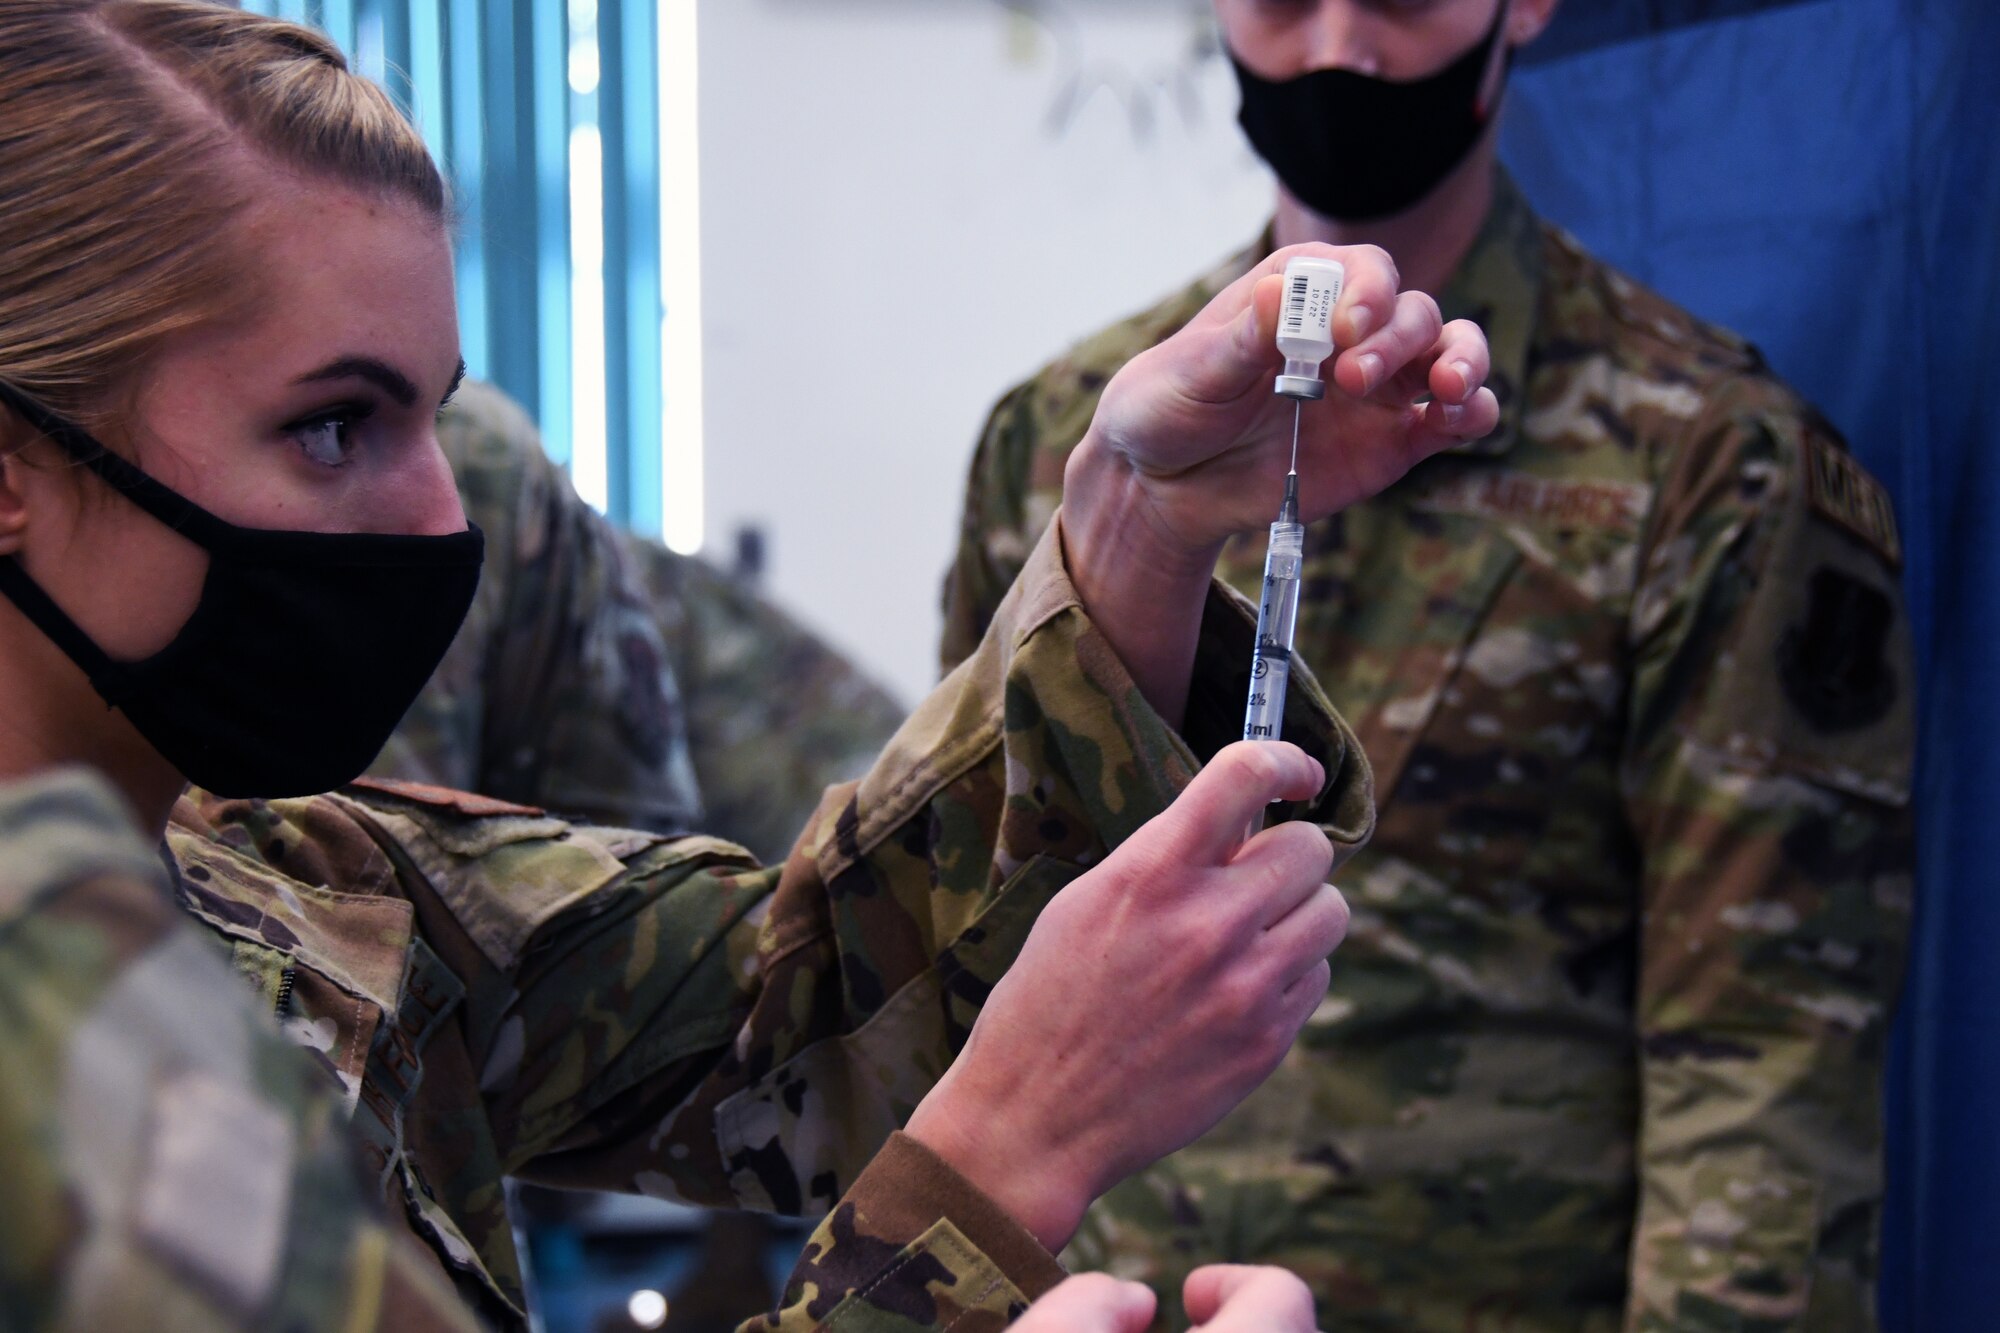 The 109th Airlift Wing began administering COVID-19 Vaccines on March 10, 2021.  The vaccines will be available to New York Army and Air National Guard members.